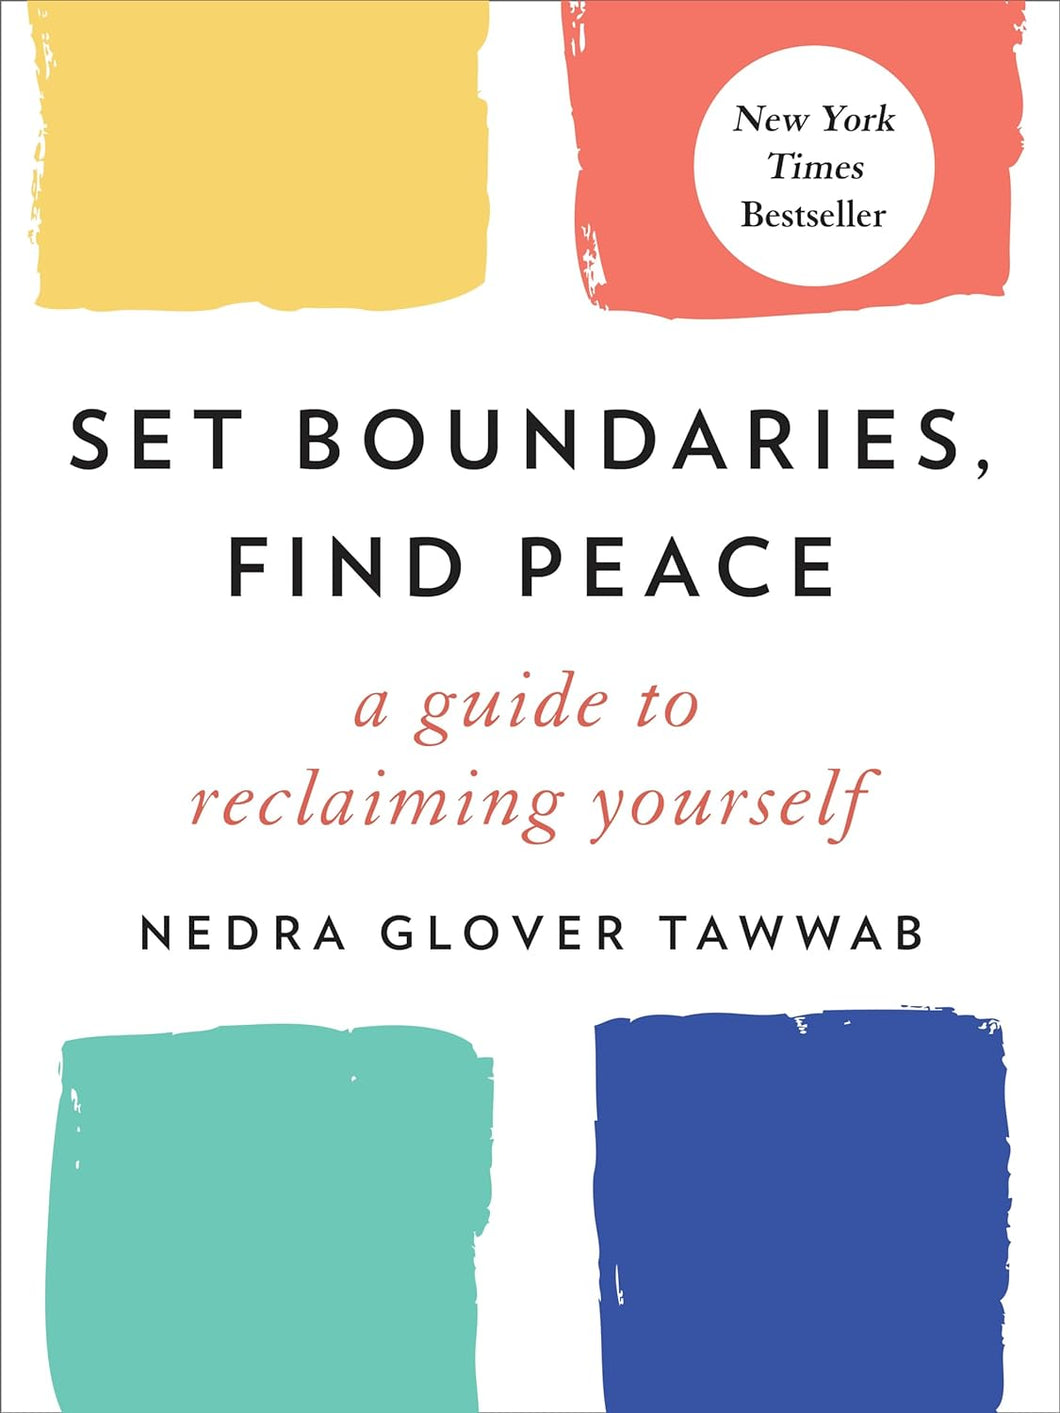 Set Boundaries & Find Peace: A Guide To Reclaiming Yourself [Nedra Glover Tawwab]